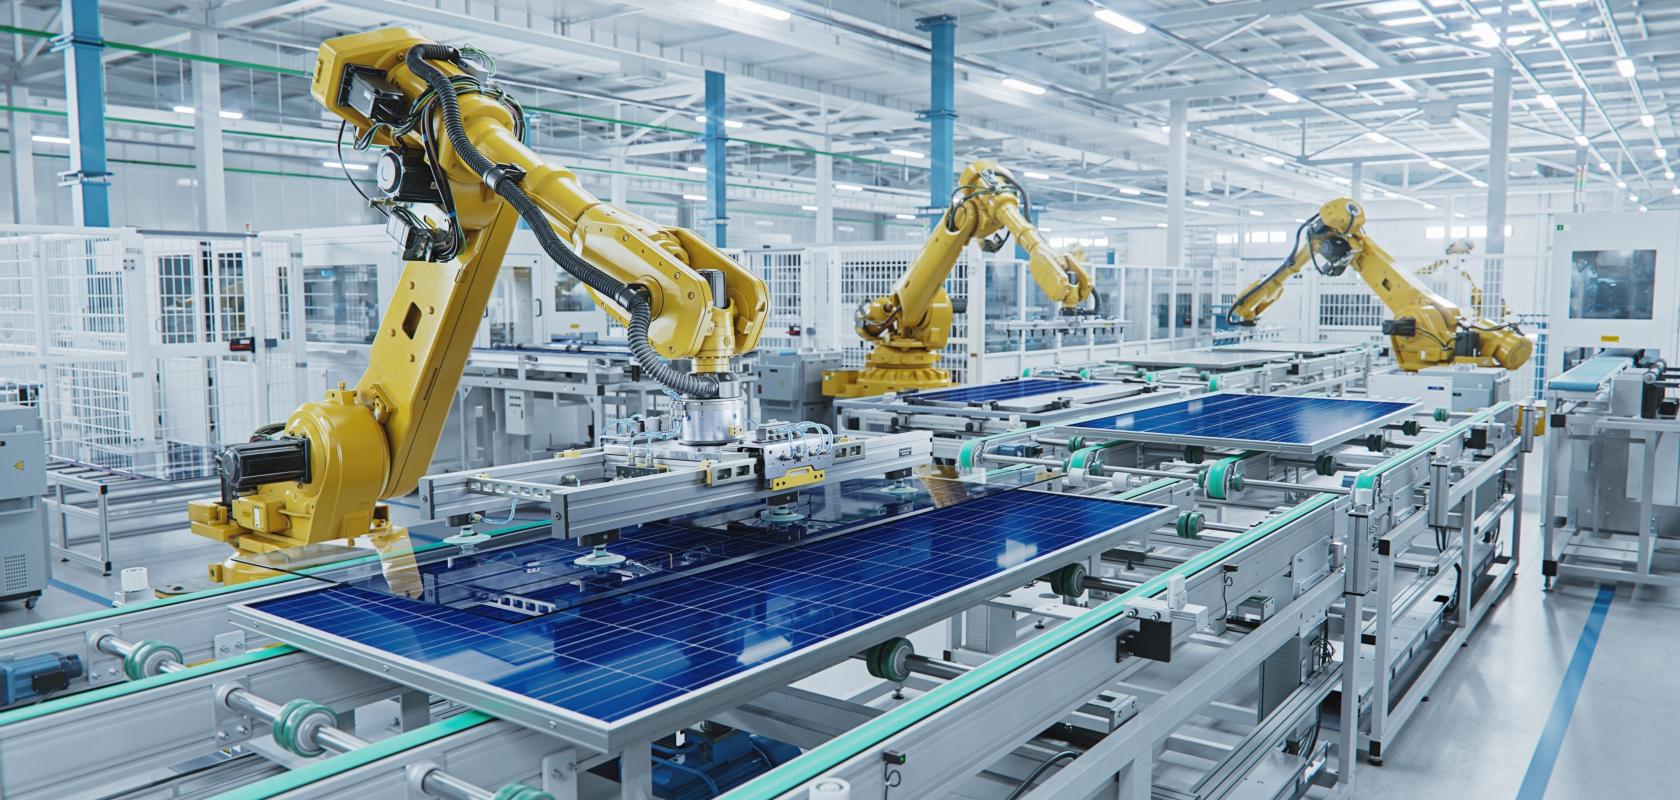 Automated manufacture of solar panels (Credit: IM Imagery/Shutterstock.com)